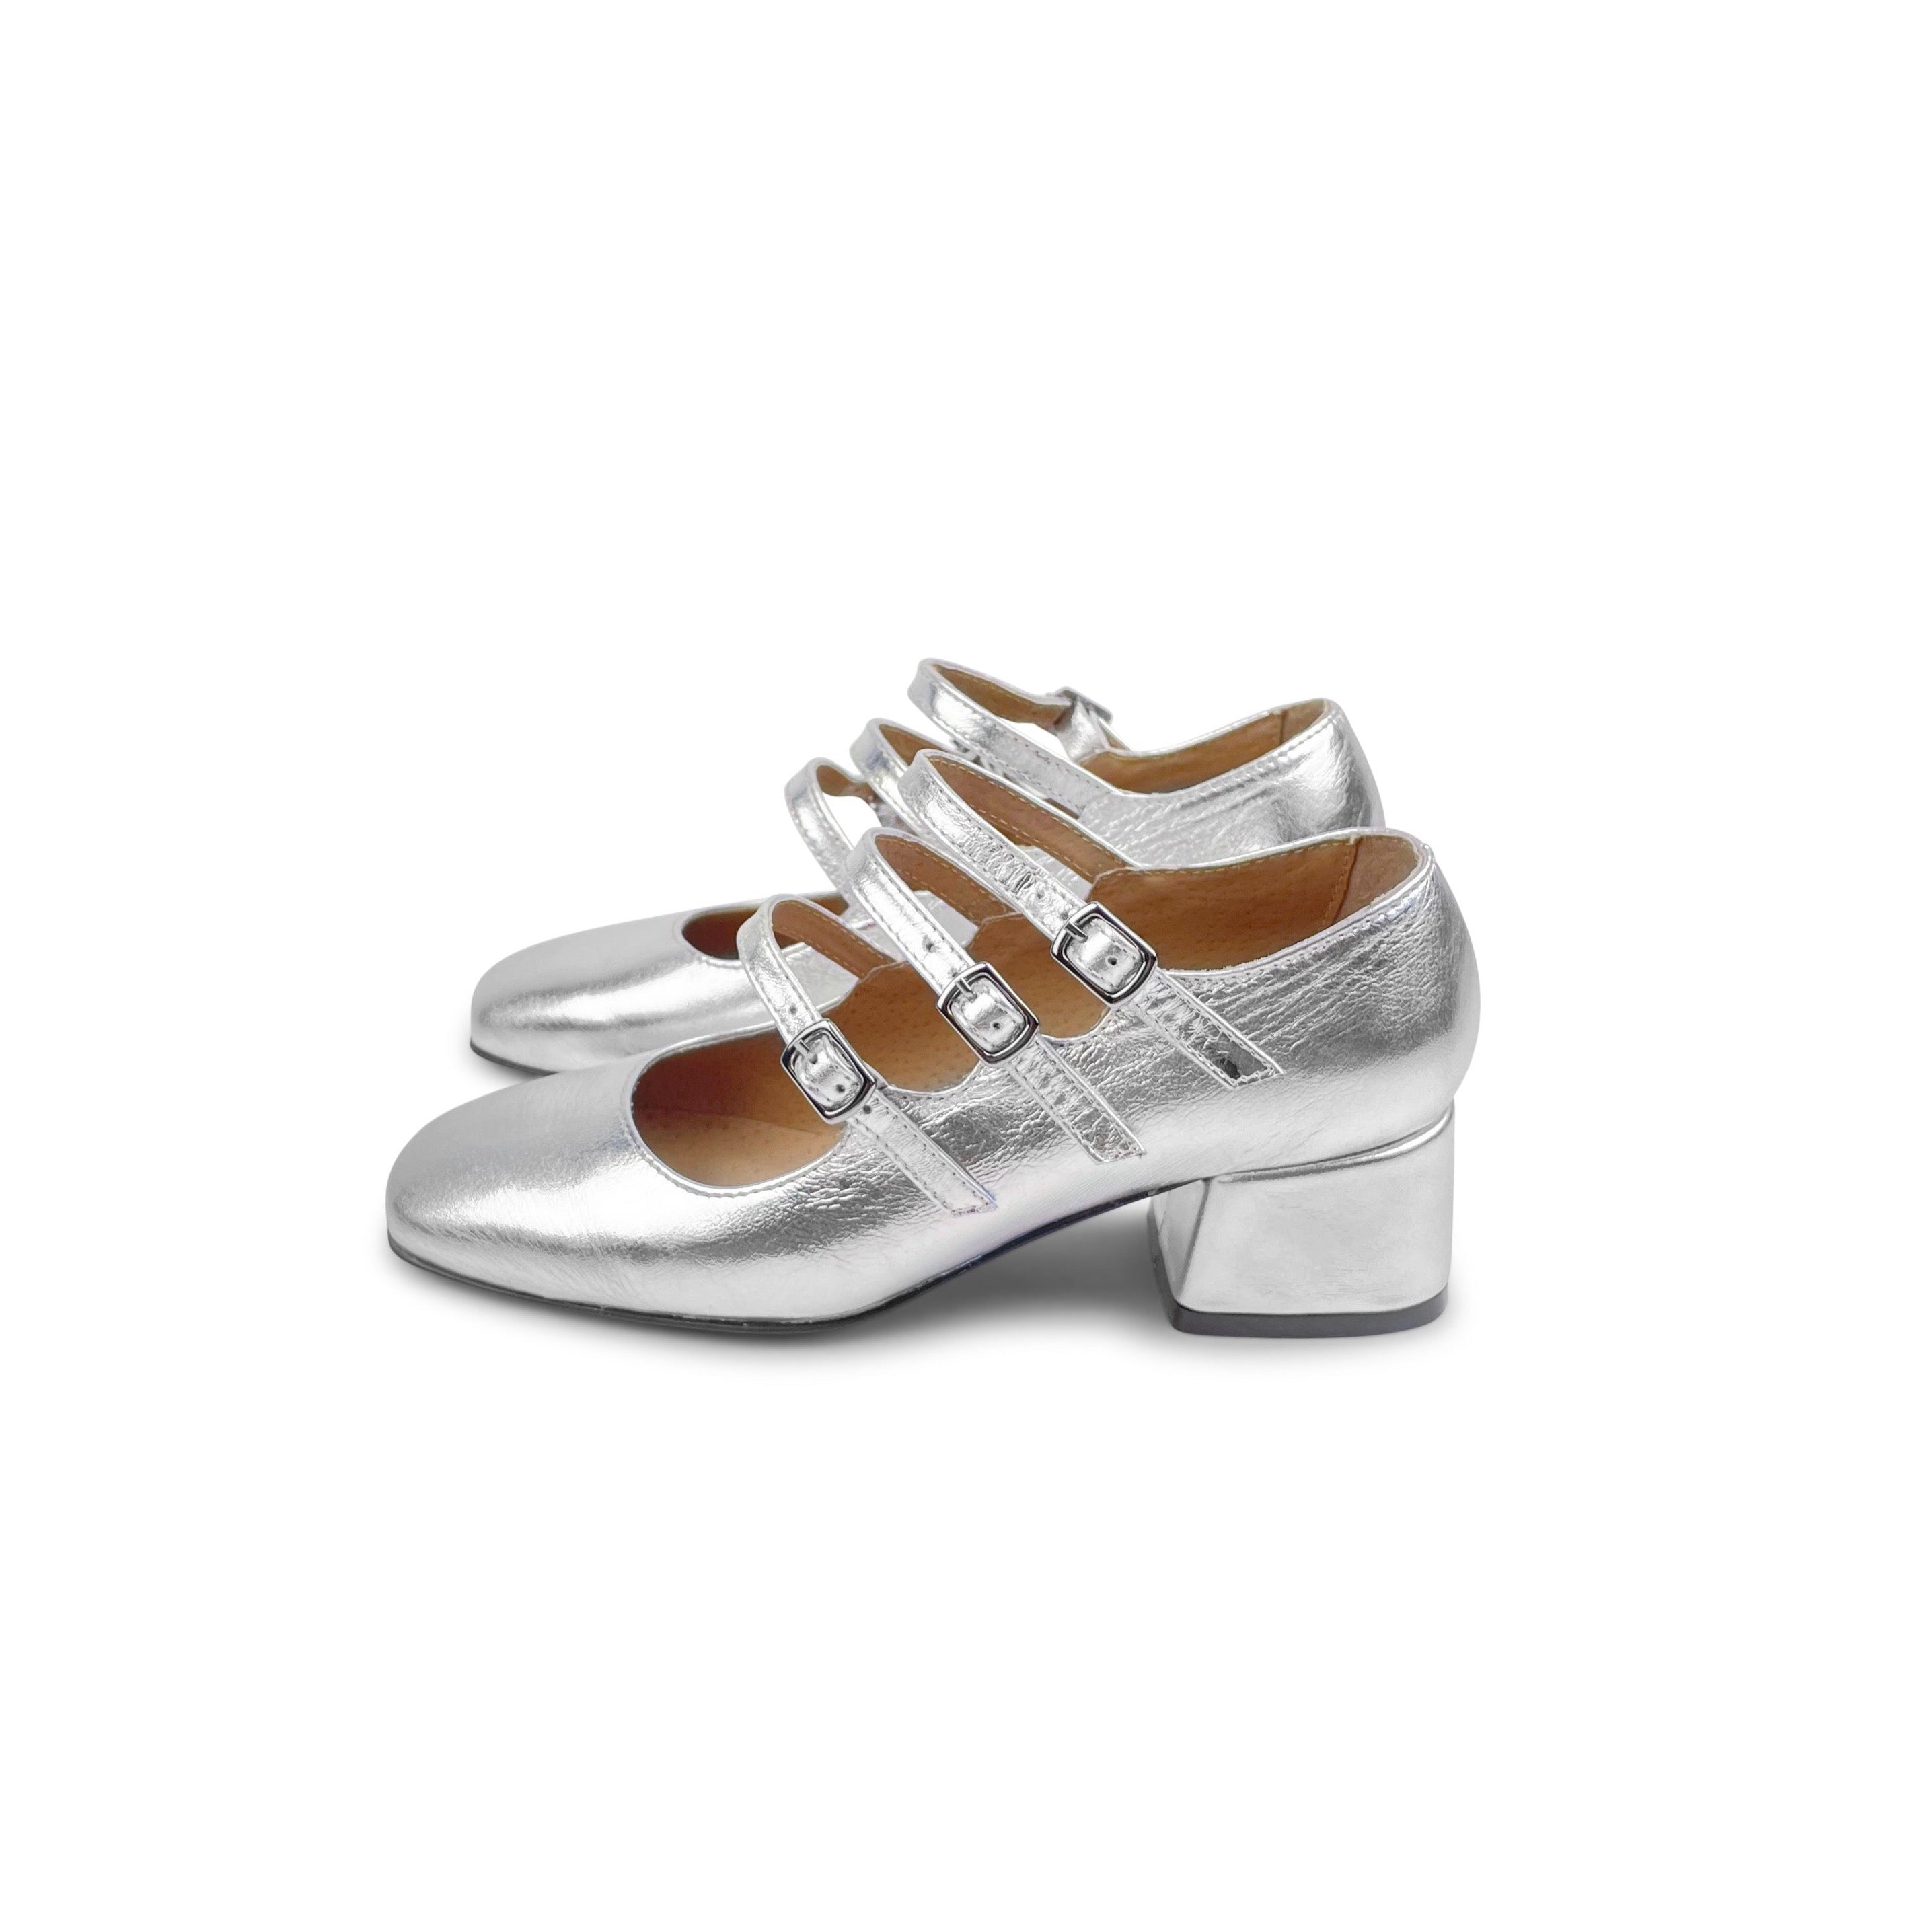 Block-heeled Mary Janes - Silver-colored/glitter - Ladies